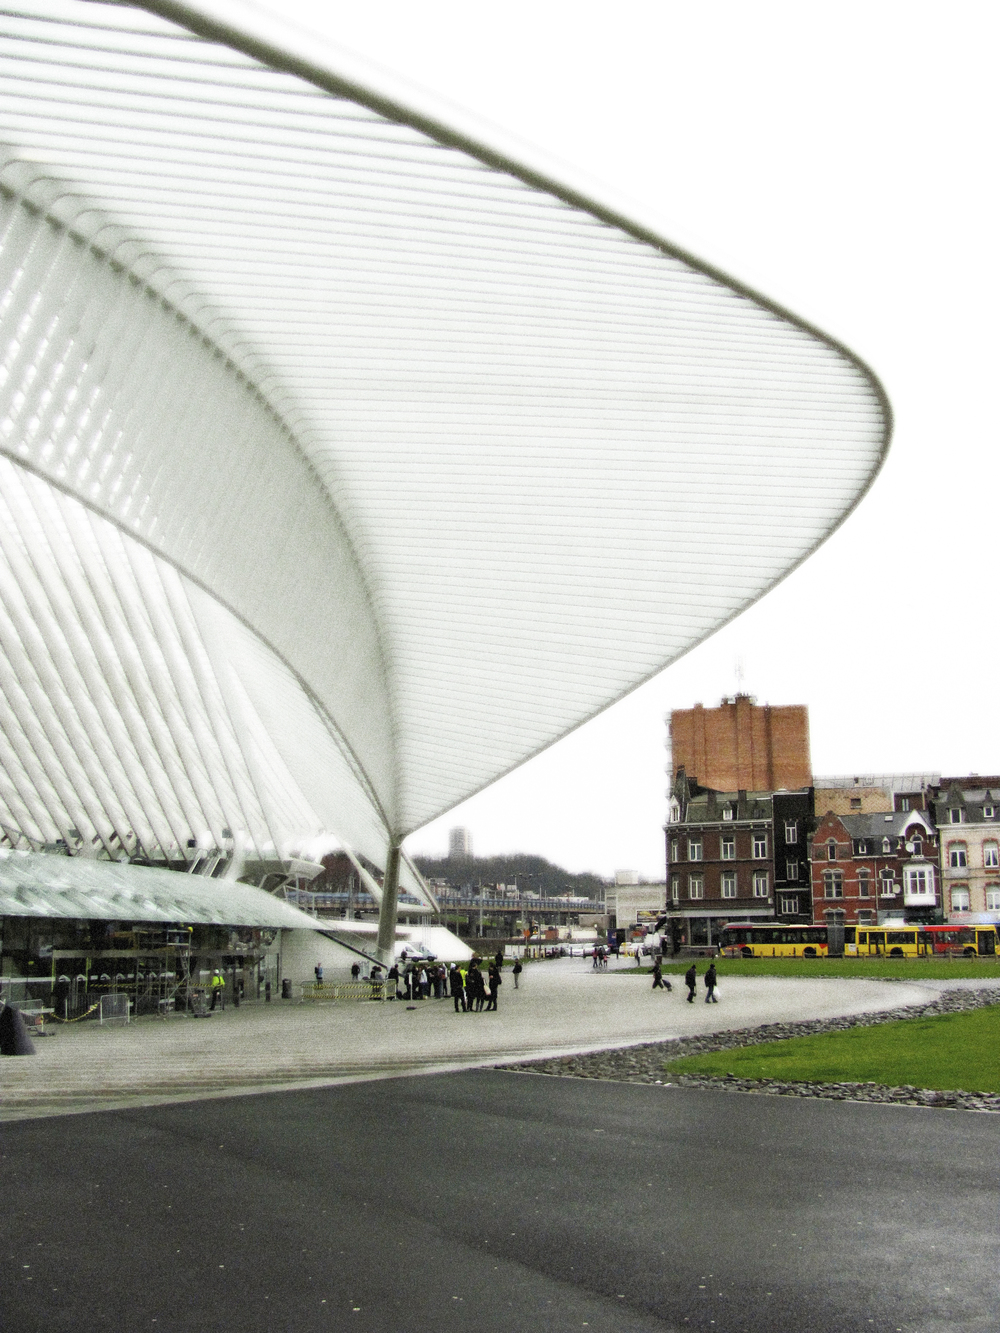  Plaza Entry Canopy, Liege, VHS 2010 